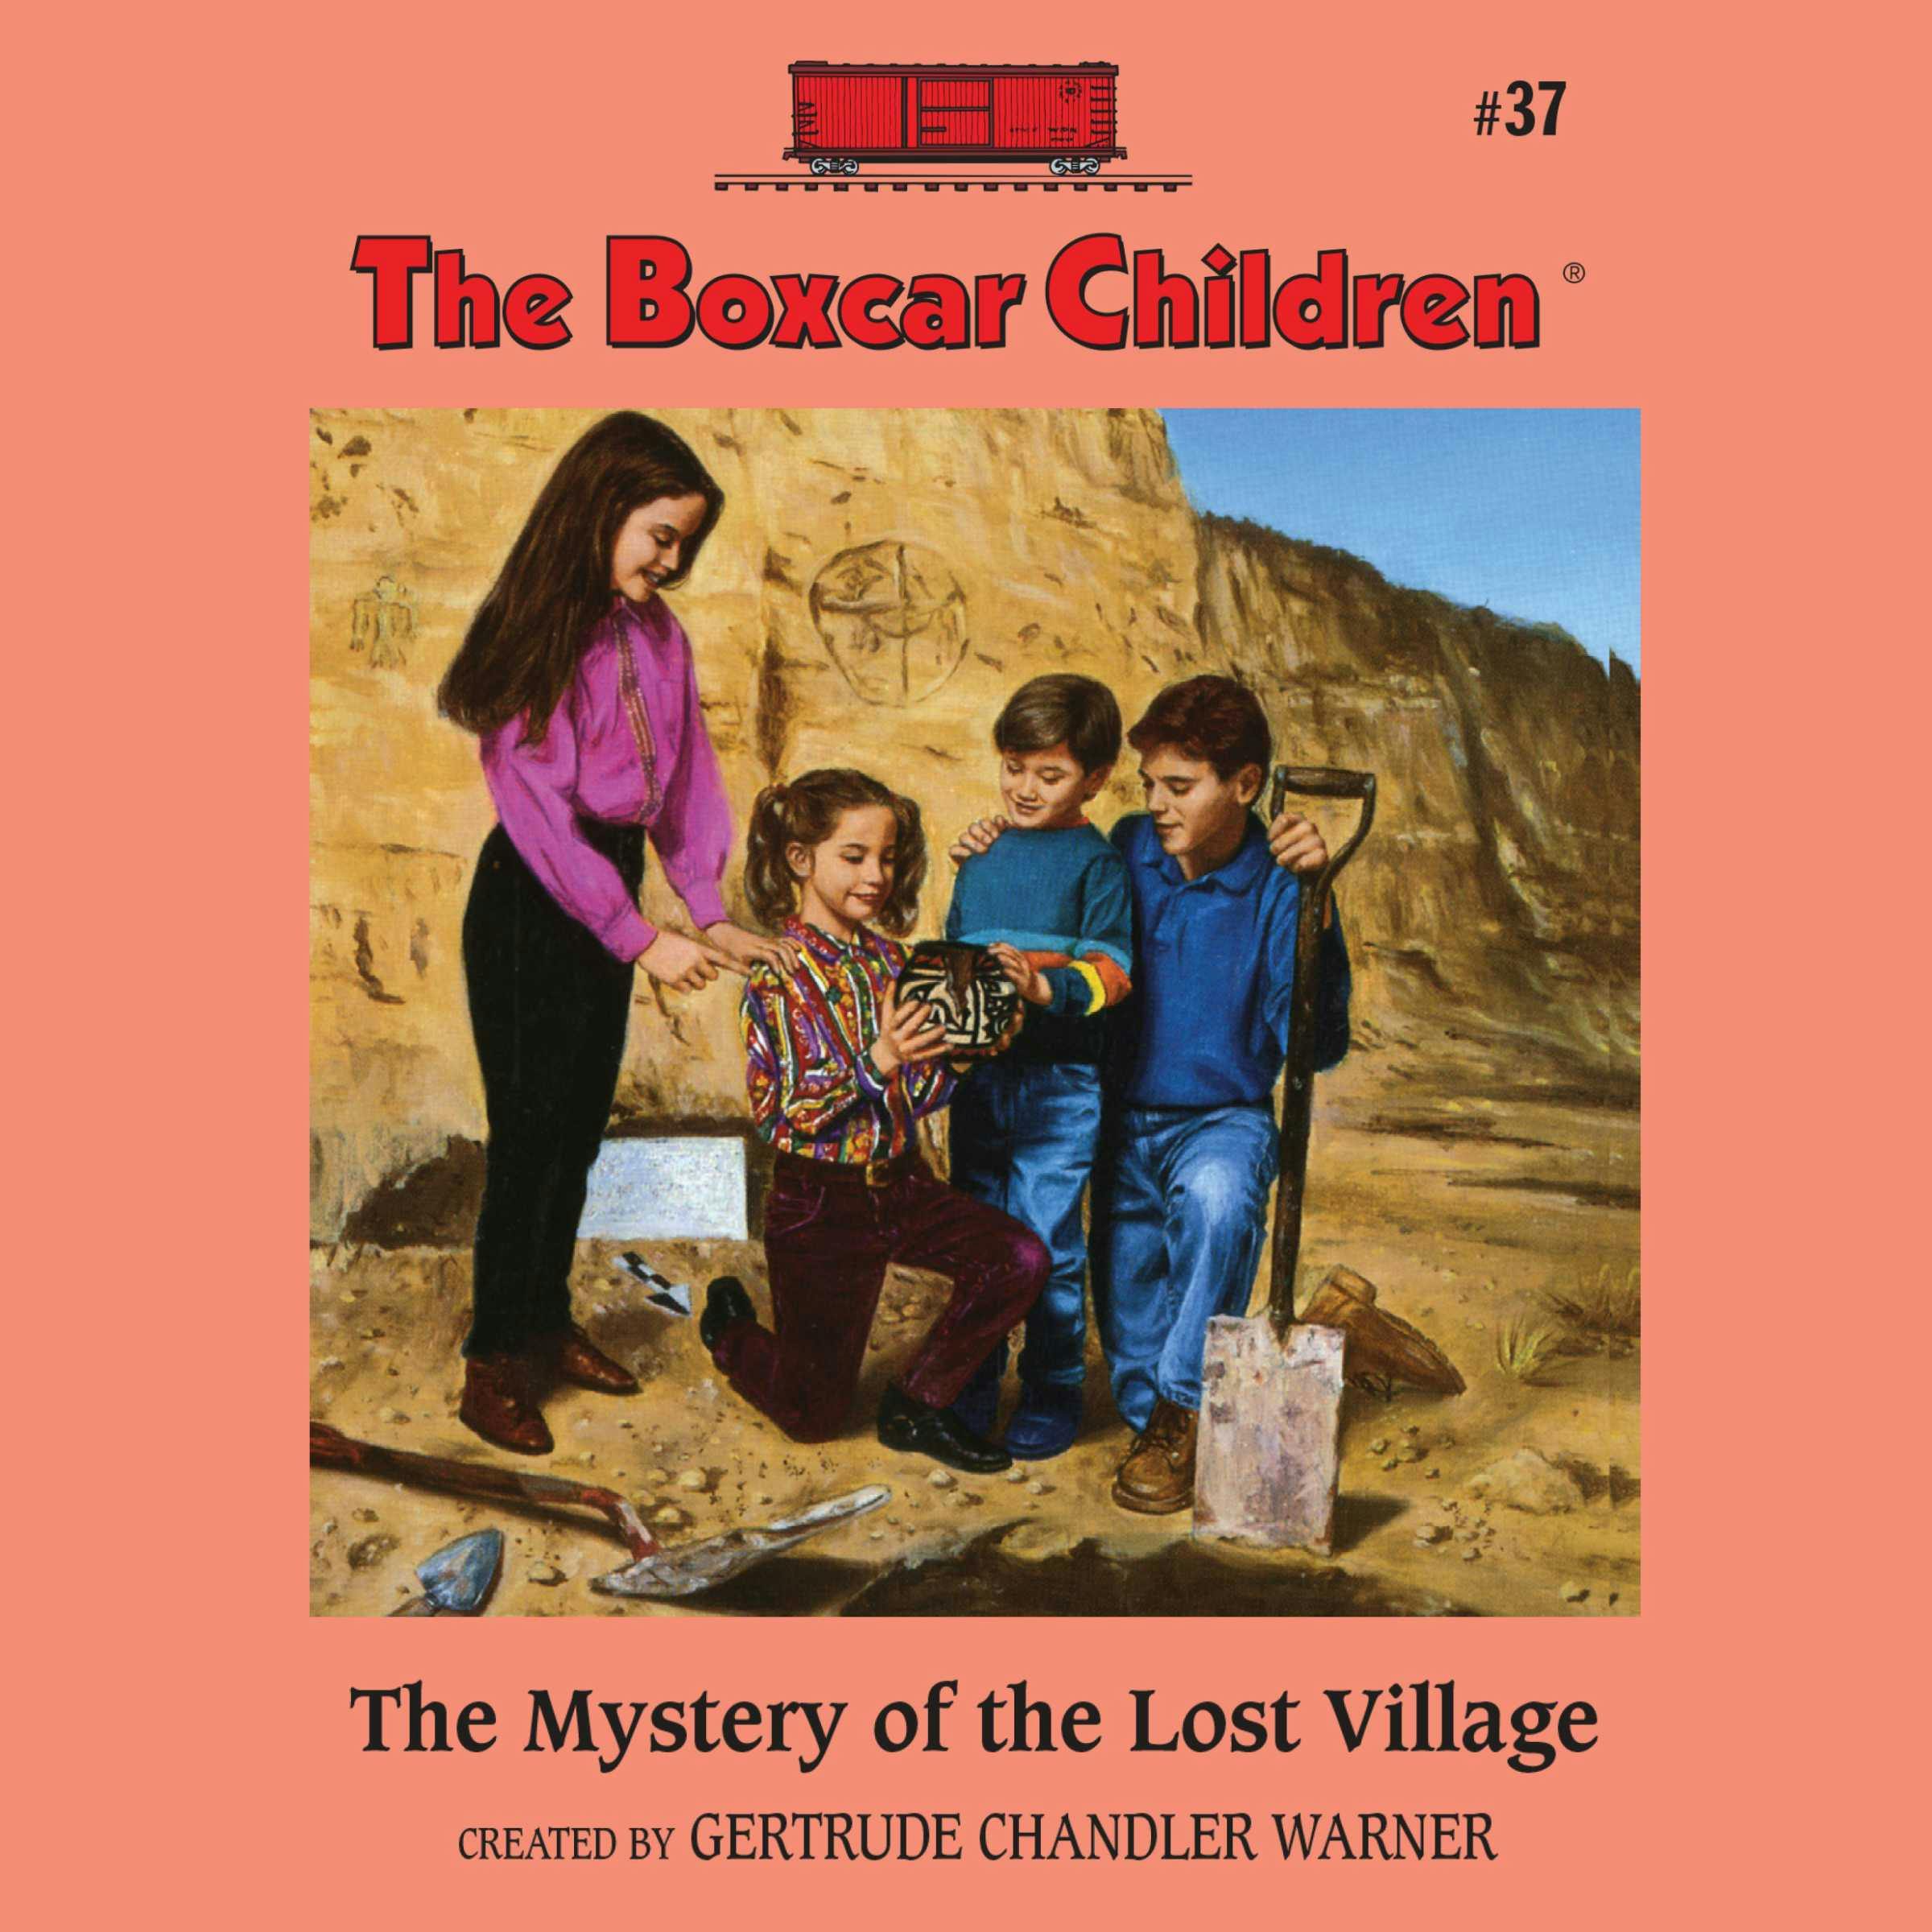 The Mystery of the Lost Village - Gertrude Chandler Warner